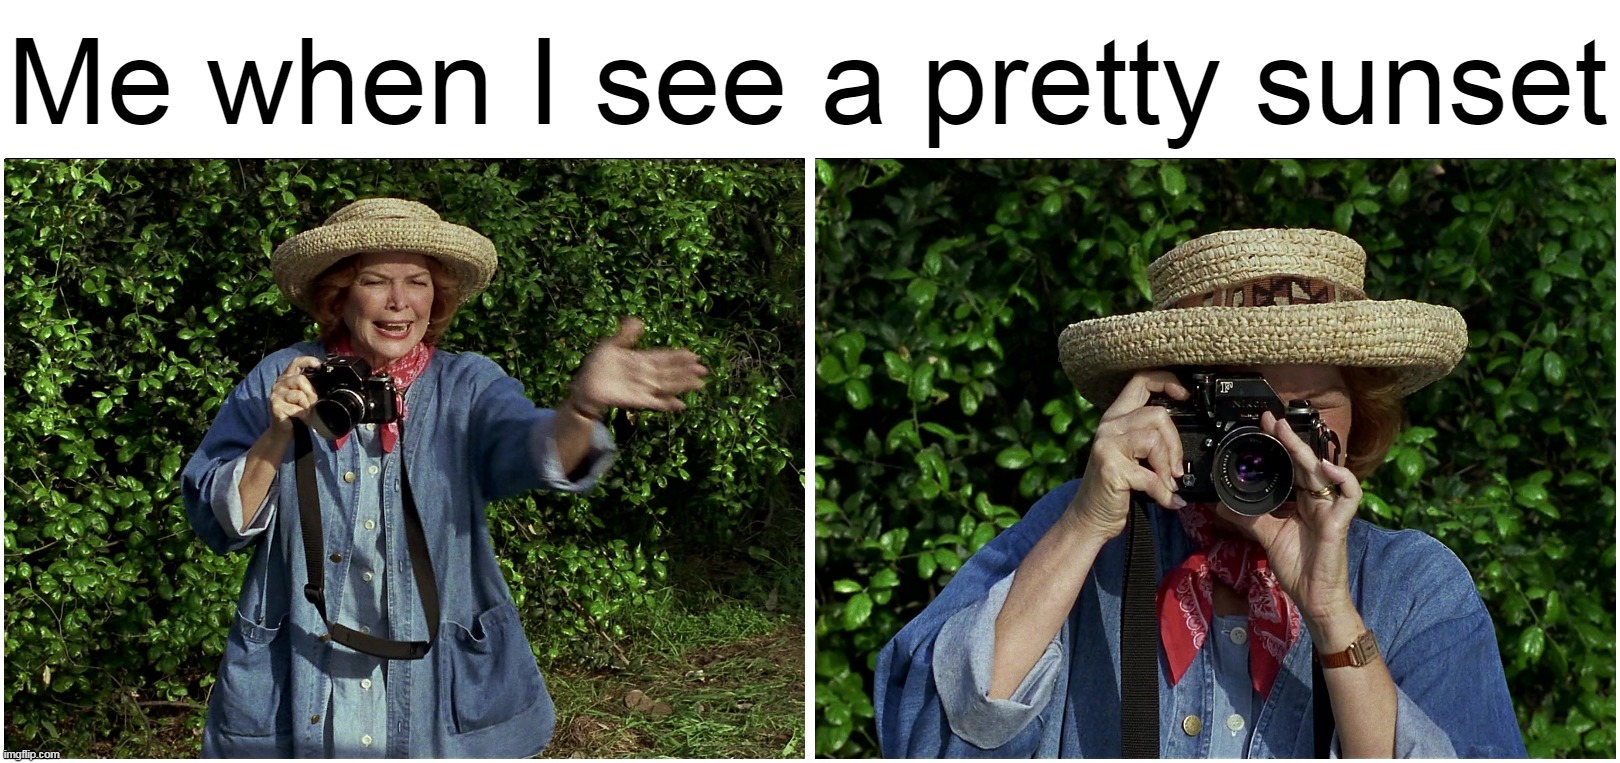 Almost an Obsession at This Point |  Me when I see a pretty sunset | image tagged in memes,blank comic panel 2x1,humor,meme,relatable | made w/ Imgflip meme maker